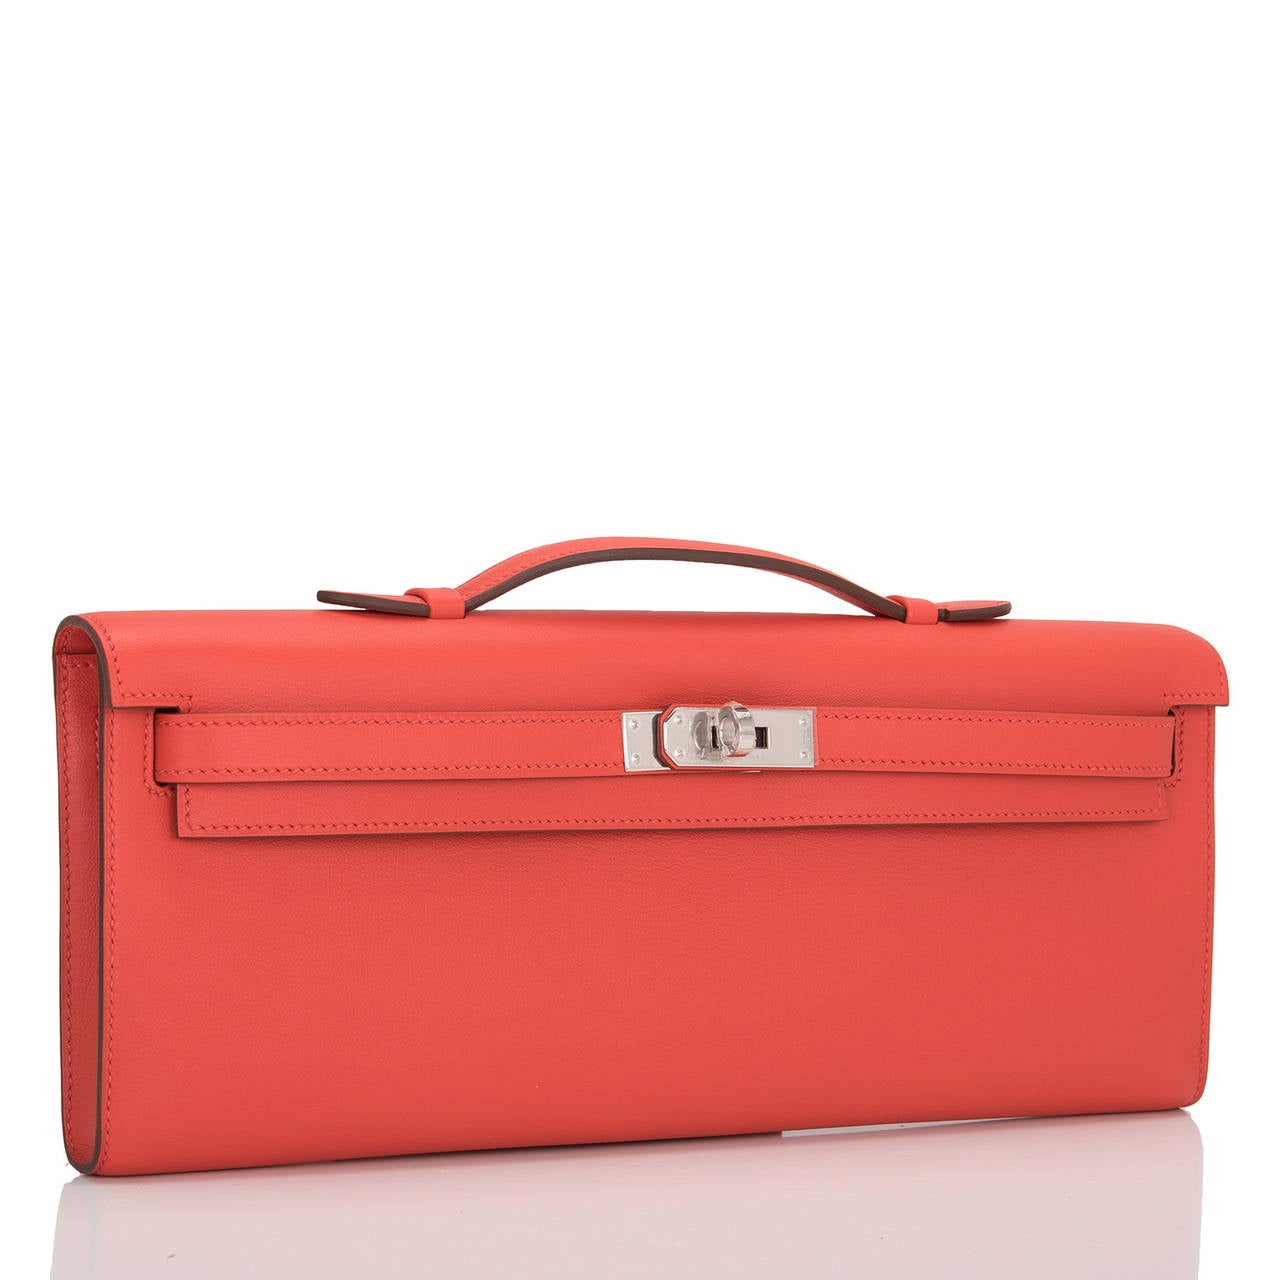 This Hermes Kelly Cut in Capucine is a gorgeous red color with palladium hardware; the bag has tonal stitching, front straps with toggle closure and a top flat handle.

The interior is lined in Capucine chèvre leather and features an open wall